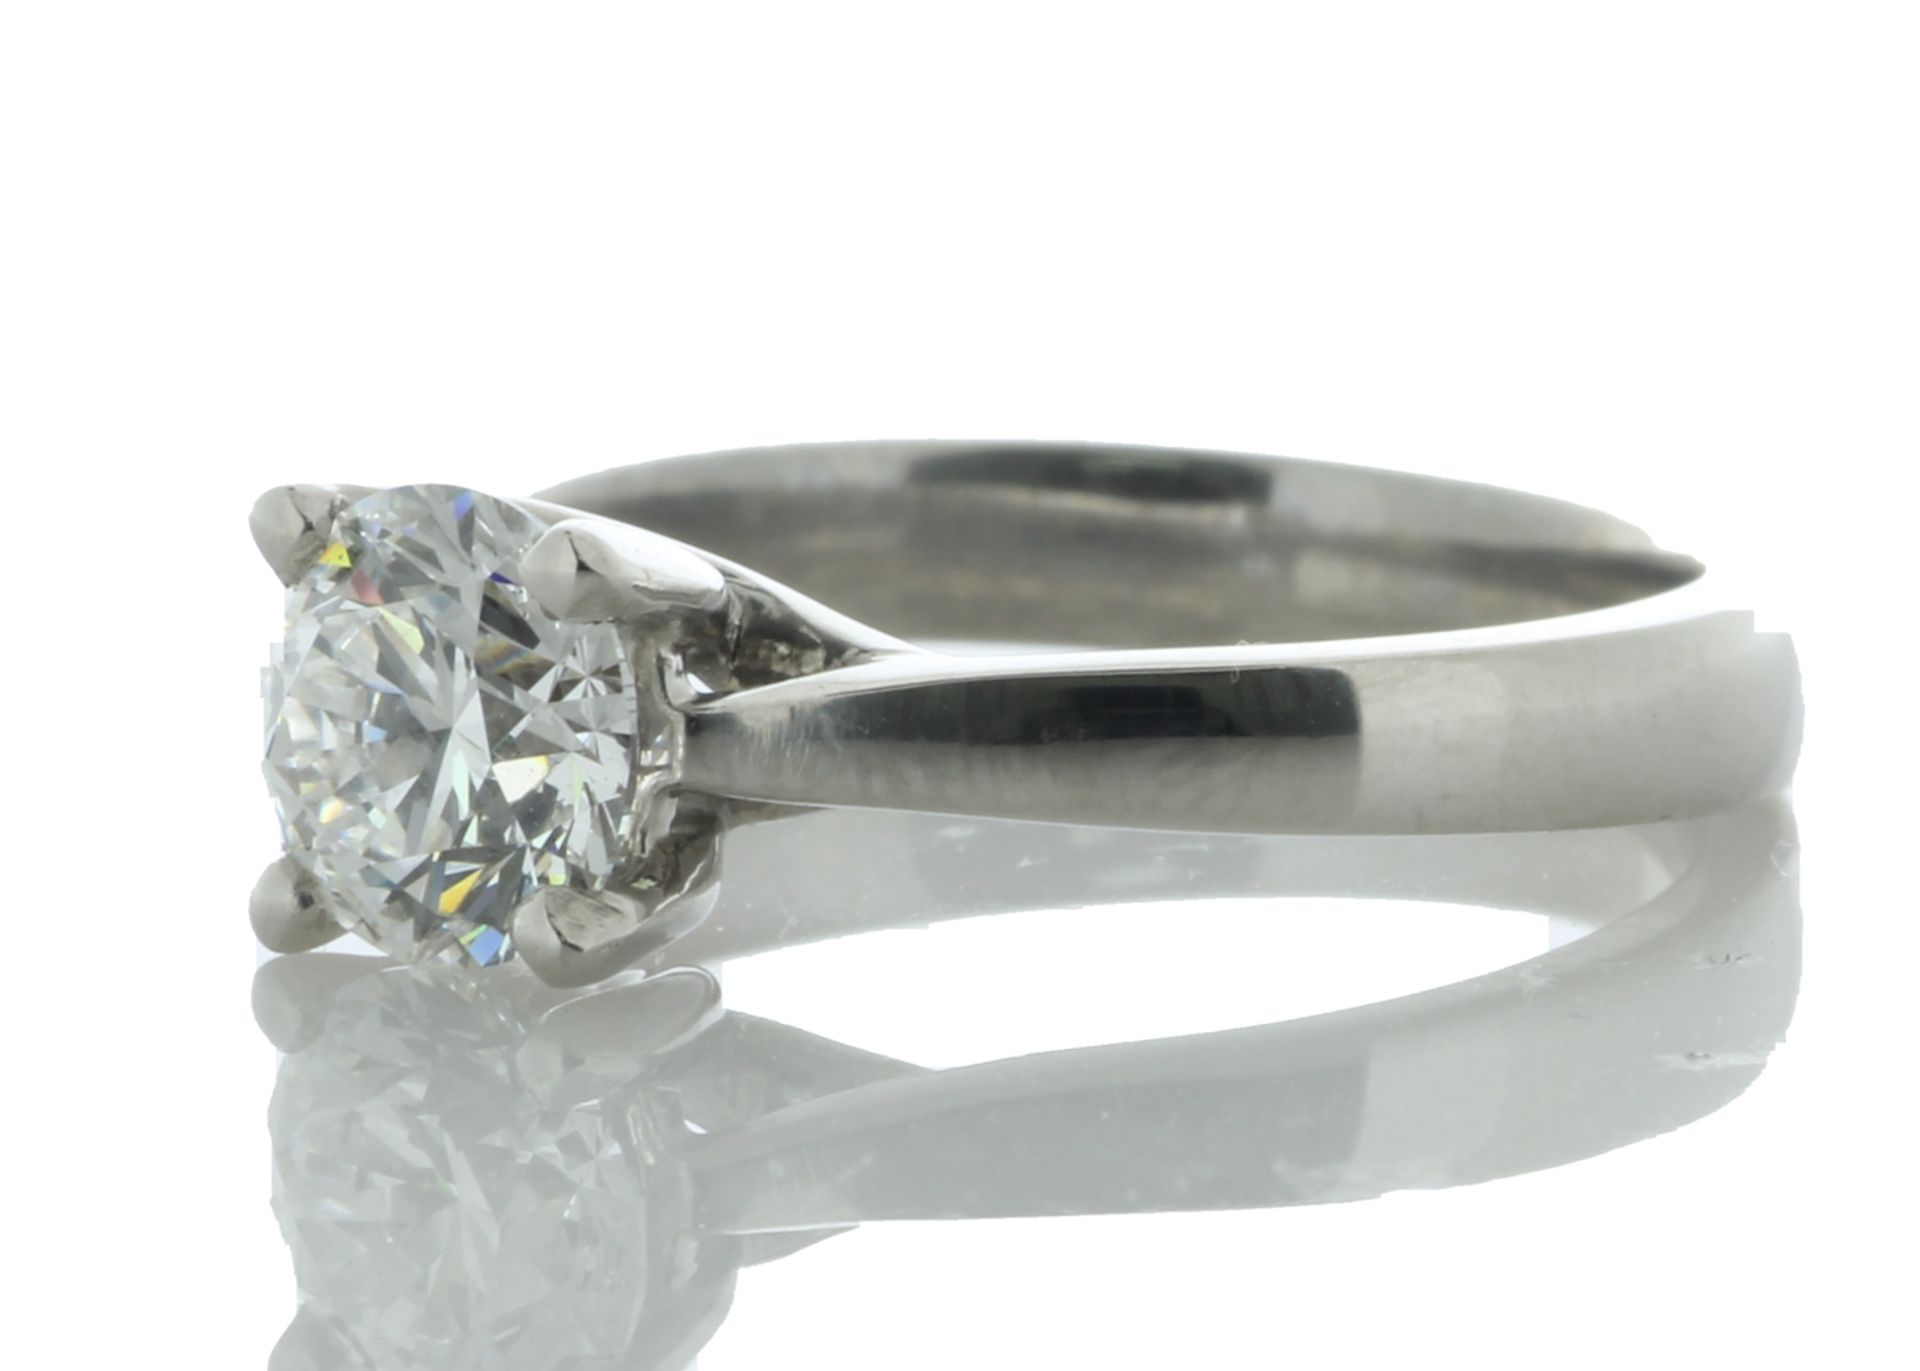 Platinum Single Stone Wire Set Diamond Ring 1.01 Carats - Valued by GIE £58,000.00 - A stunning - Image 2 of 5